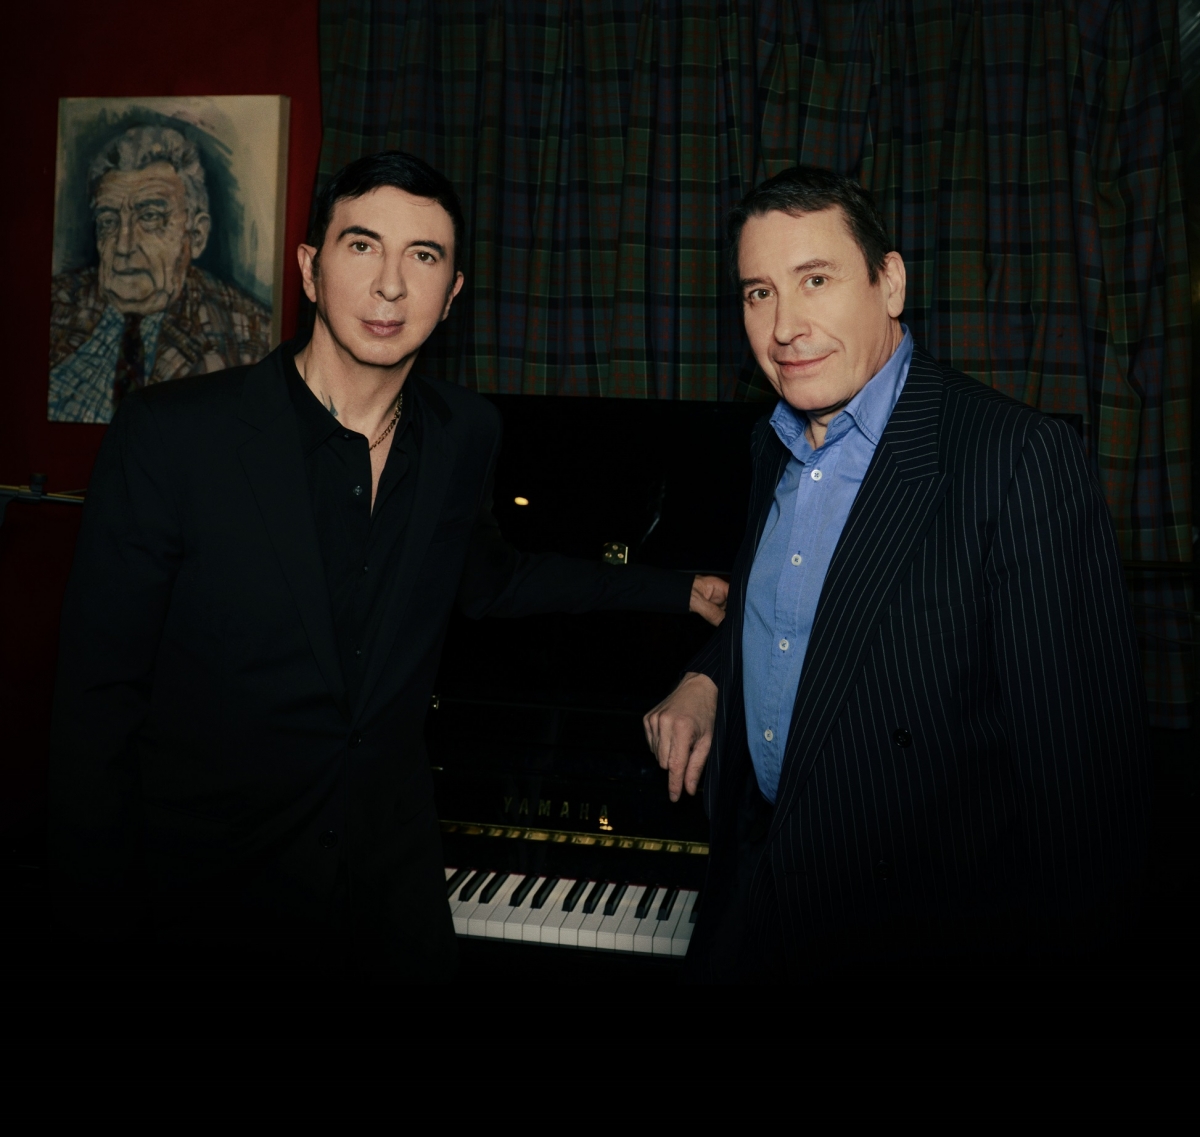 who is on tour with jools holland